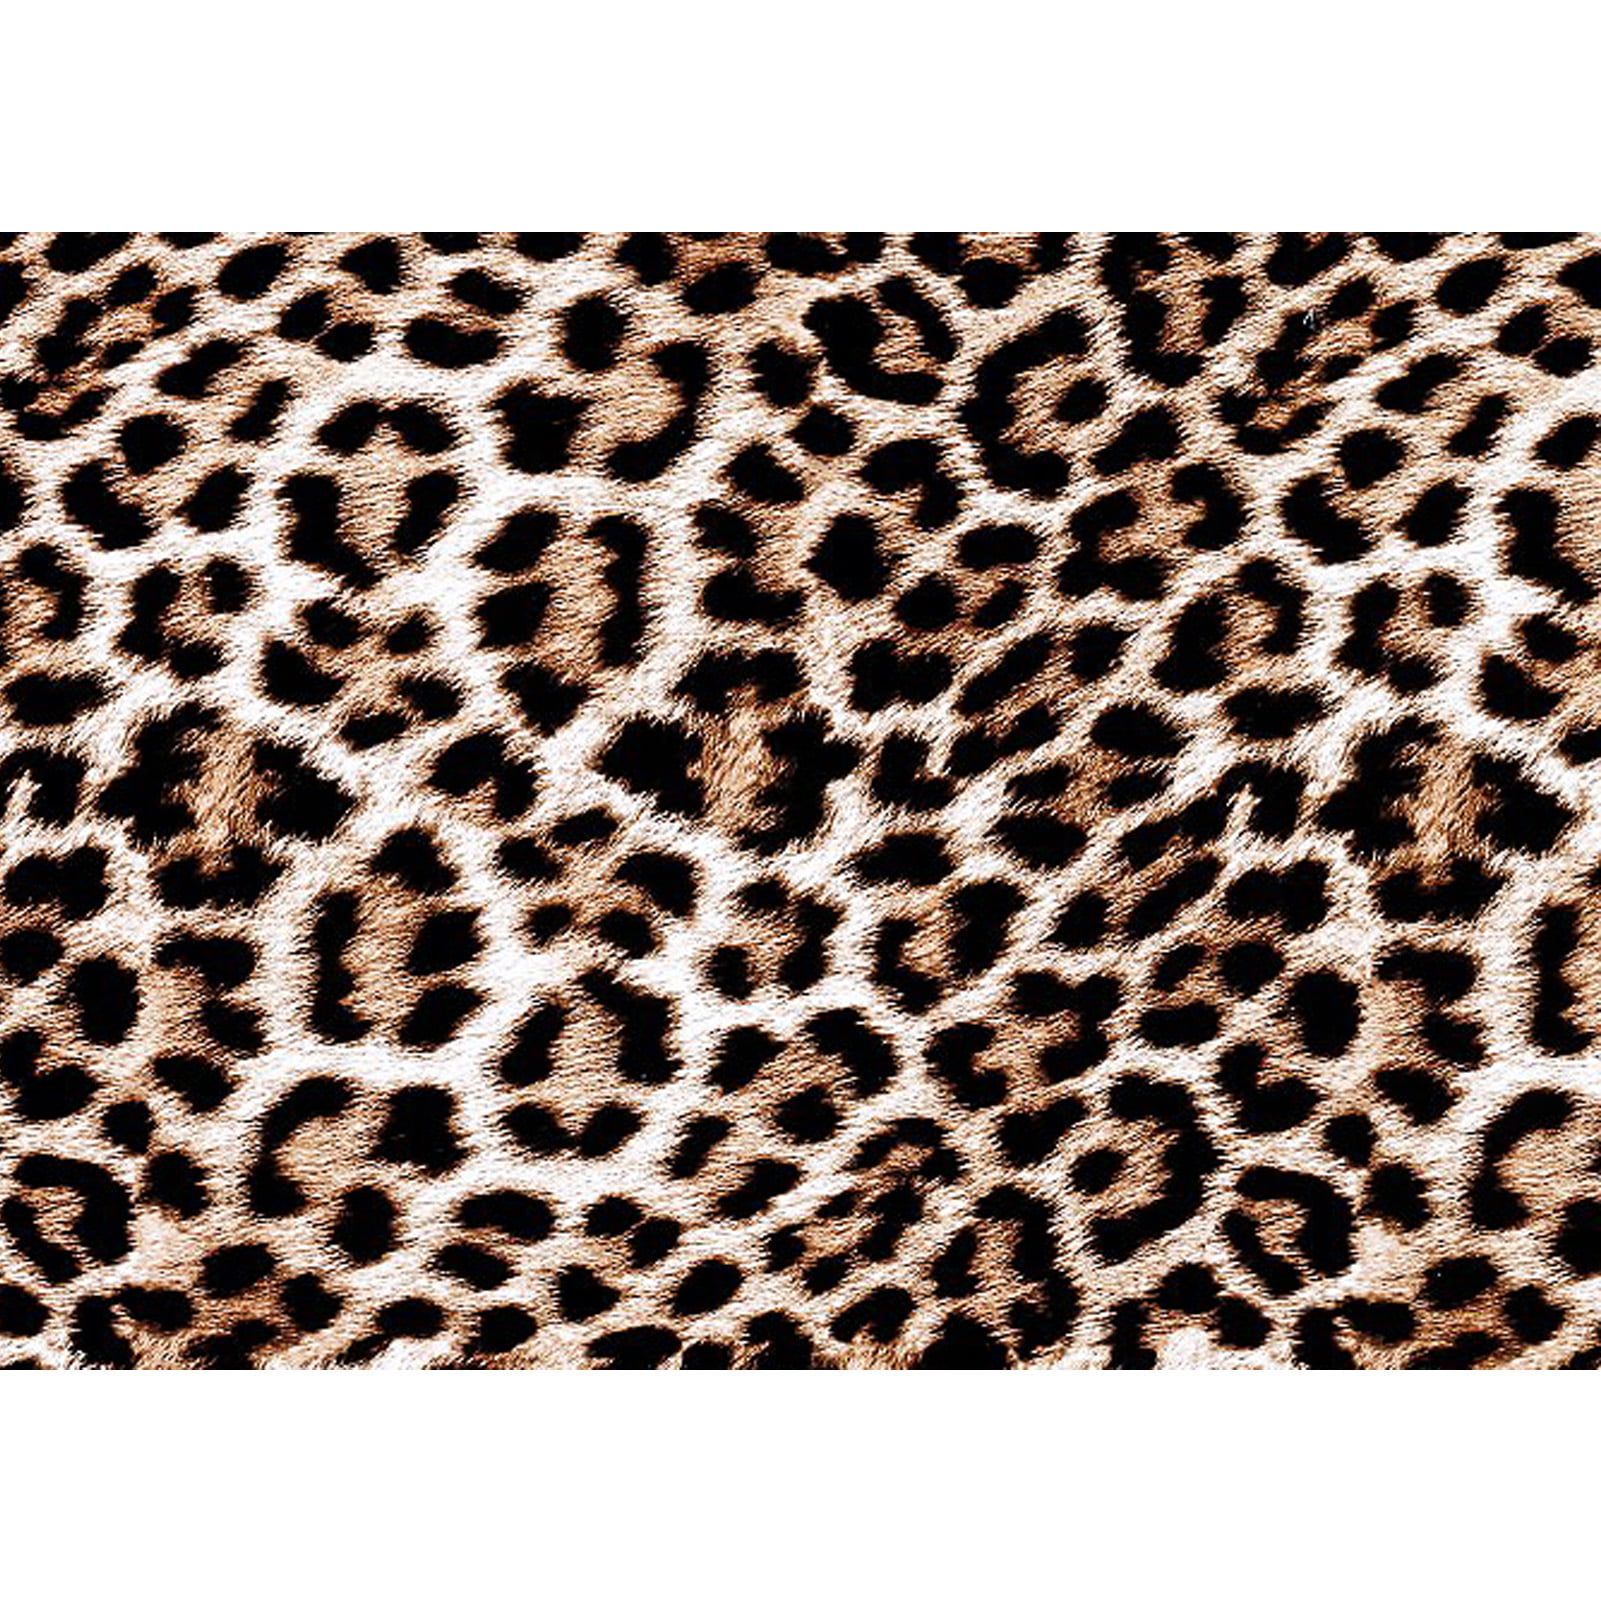 Leopard Patterned Heat Transfer Vinyl Iron on HTV Vinyl Animal Print Heat Transfer Vinyl for T-Shirt Hats Decoration DIY Craft Projects Light Brown 10 Inch x 10 Feet 